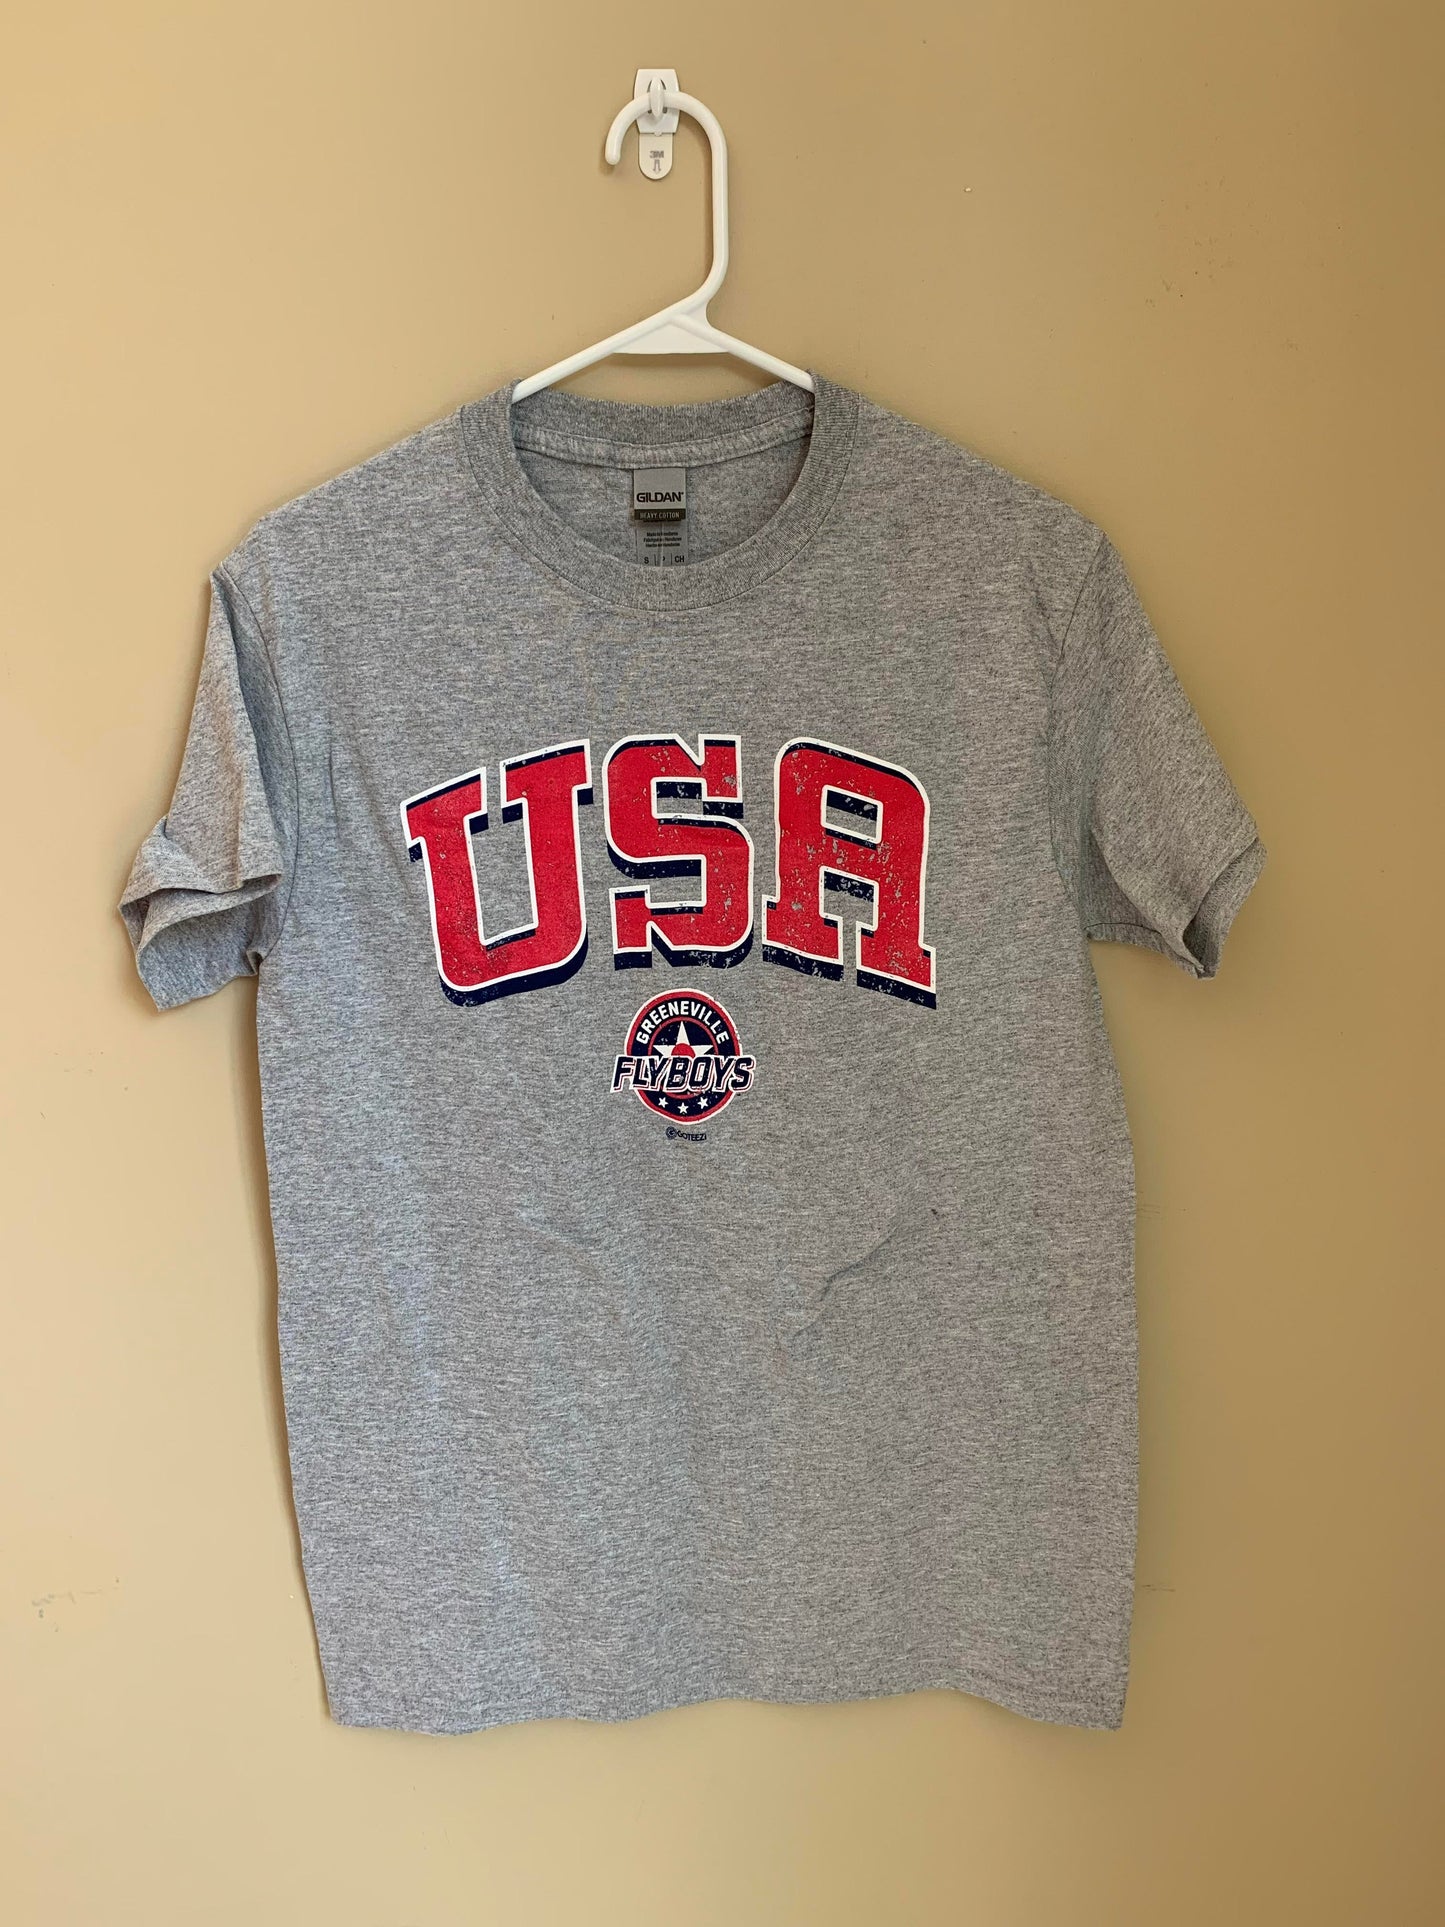 USA Flyboys T-shirt